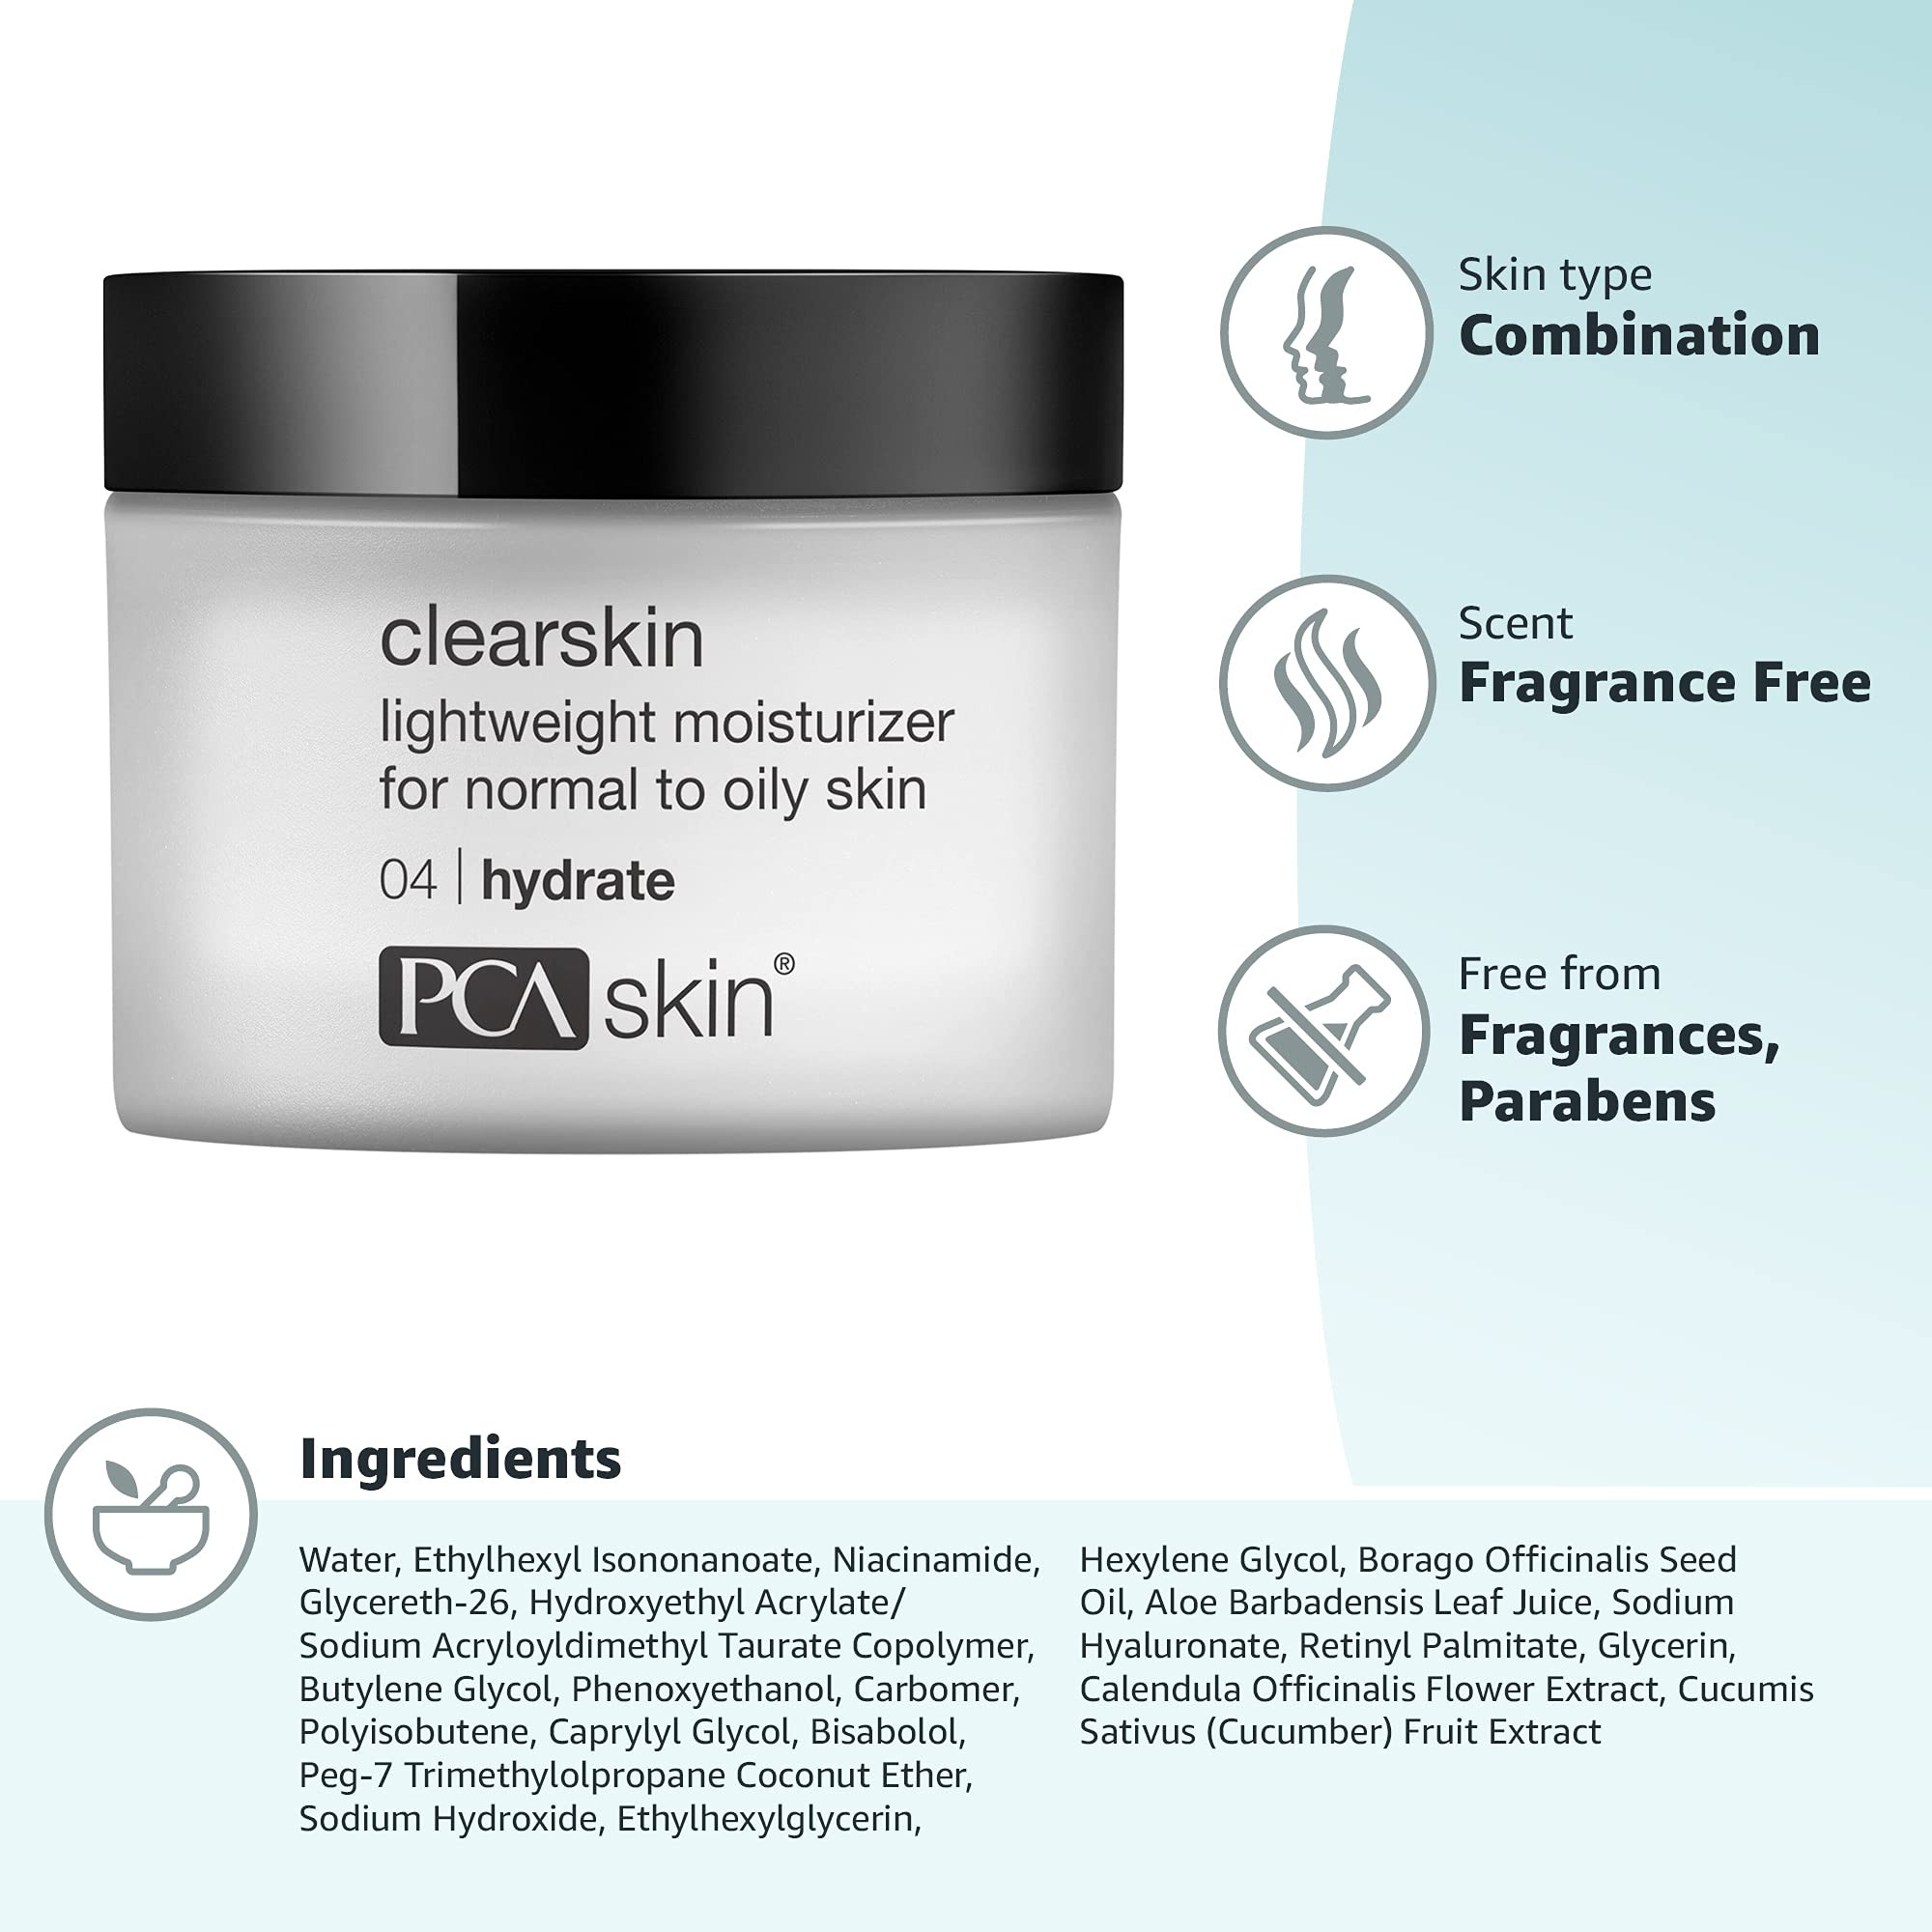 PCA SKIN Clearskin Lightweight Face Moisturizer for Oily Skin, Daily Hydrating Facial Moisturizer for Oily, Acne-Prone, and Sensitive Skin, Quick Absorbing, Reduces Discolorations, 1.7 oz Jar